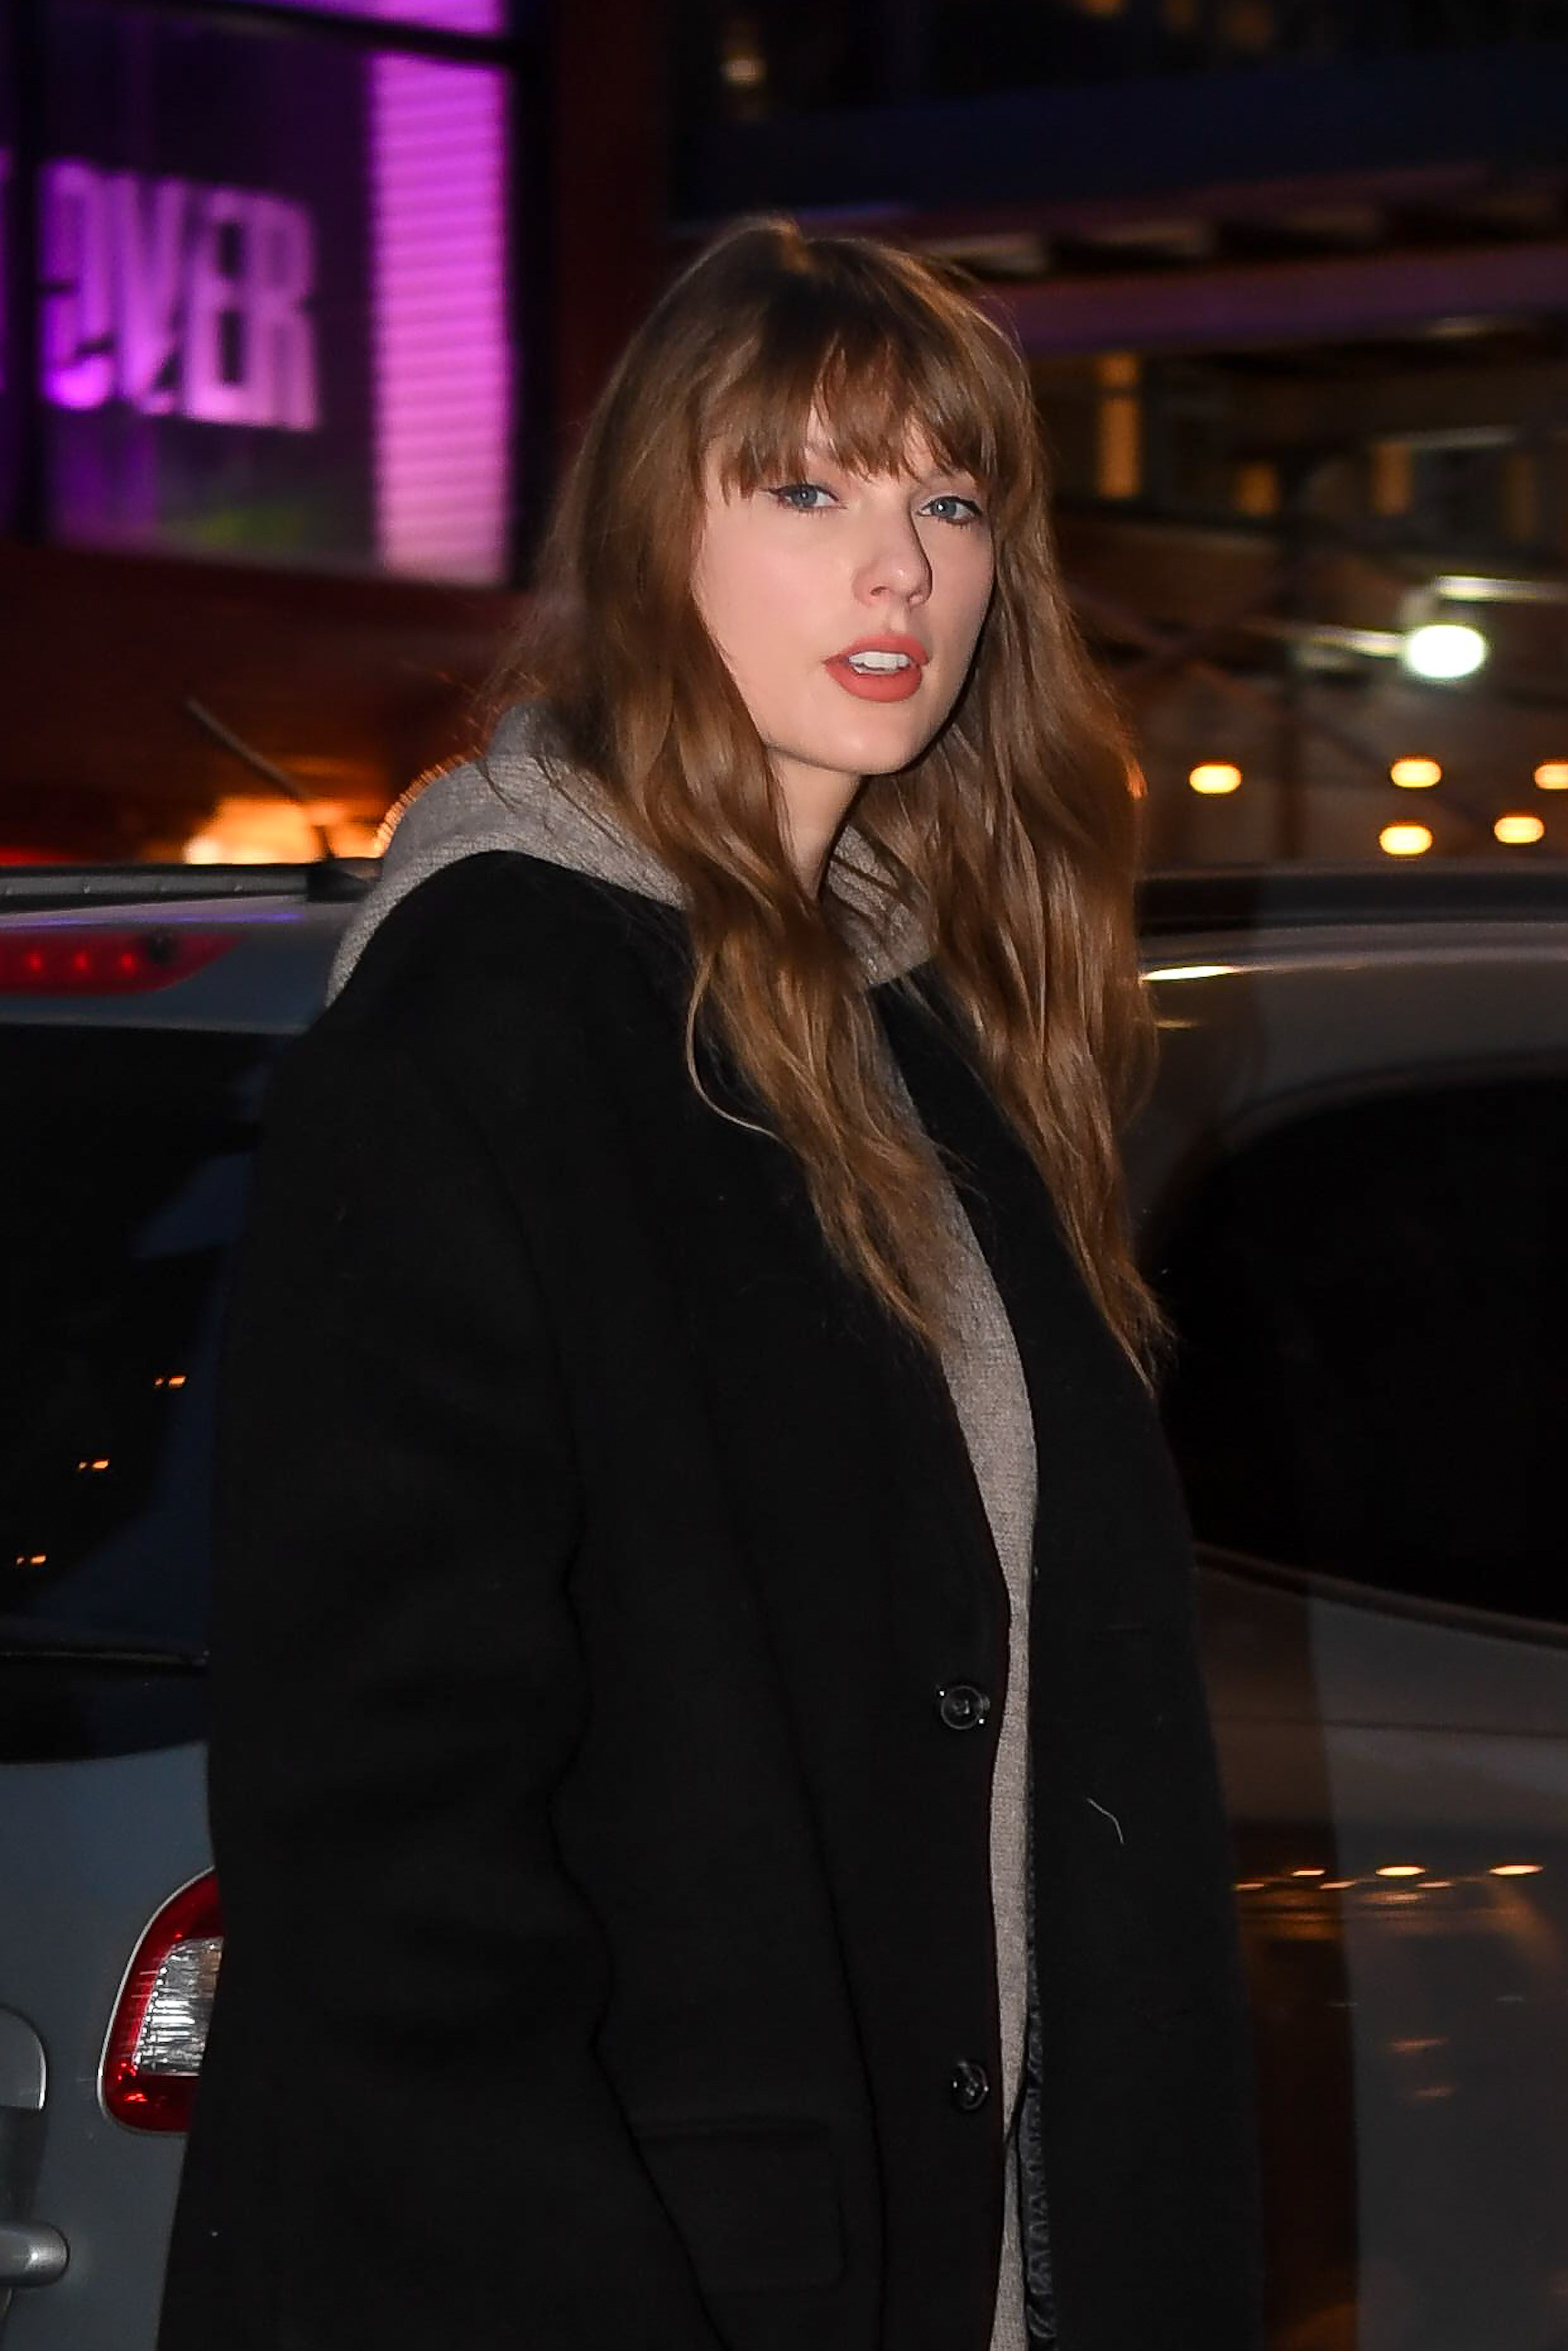 Taylor Swift walking outdoors at night in a casual hooded sweatshirt and a black coat